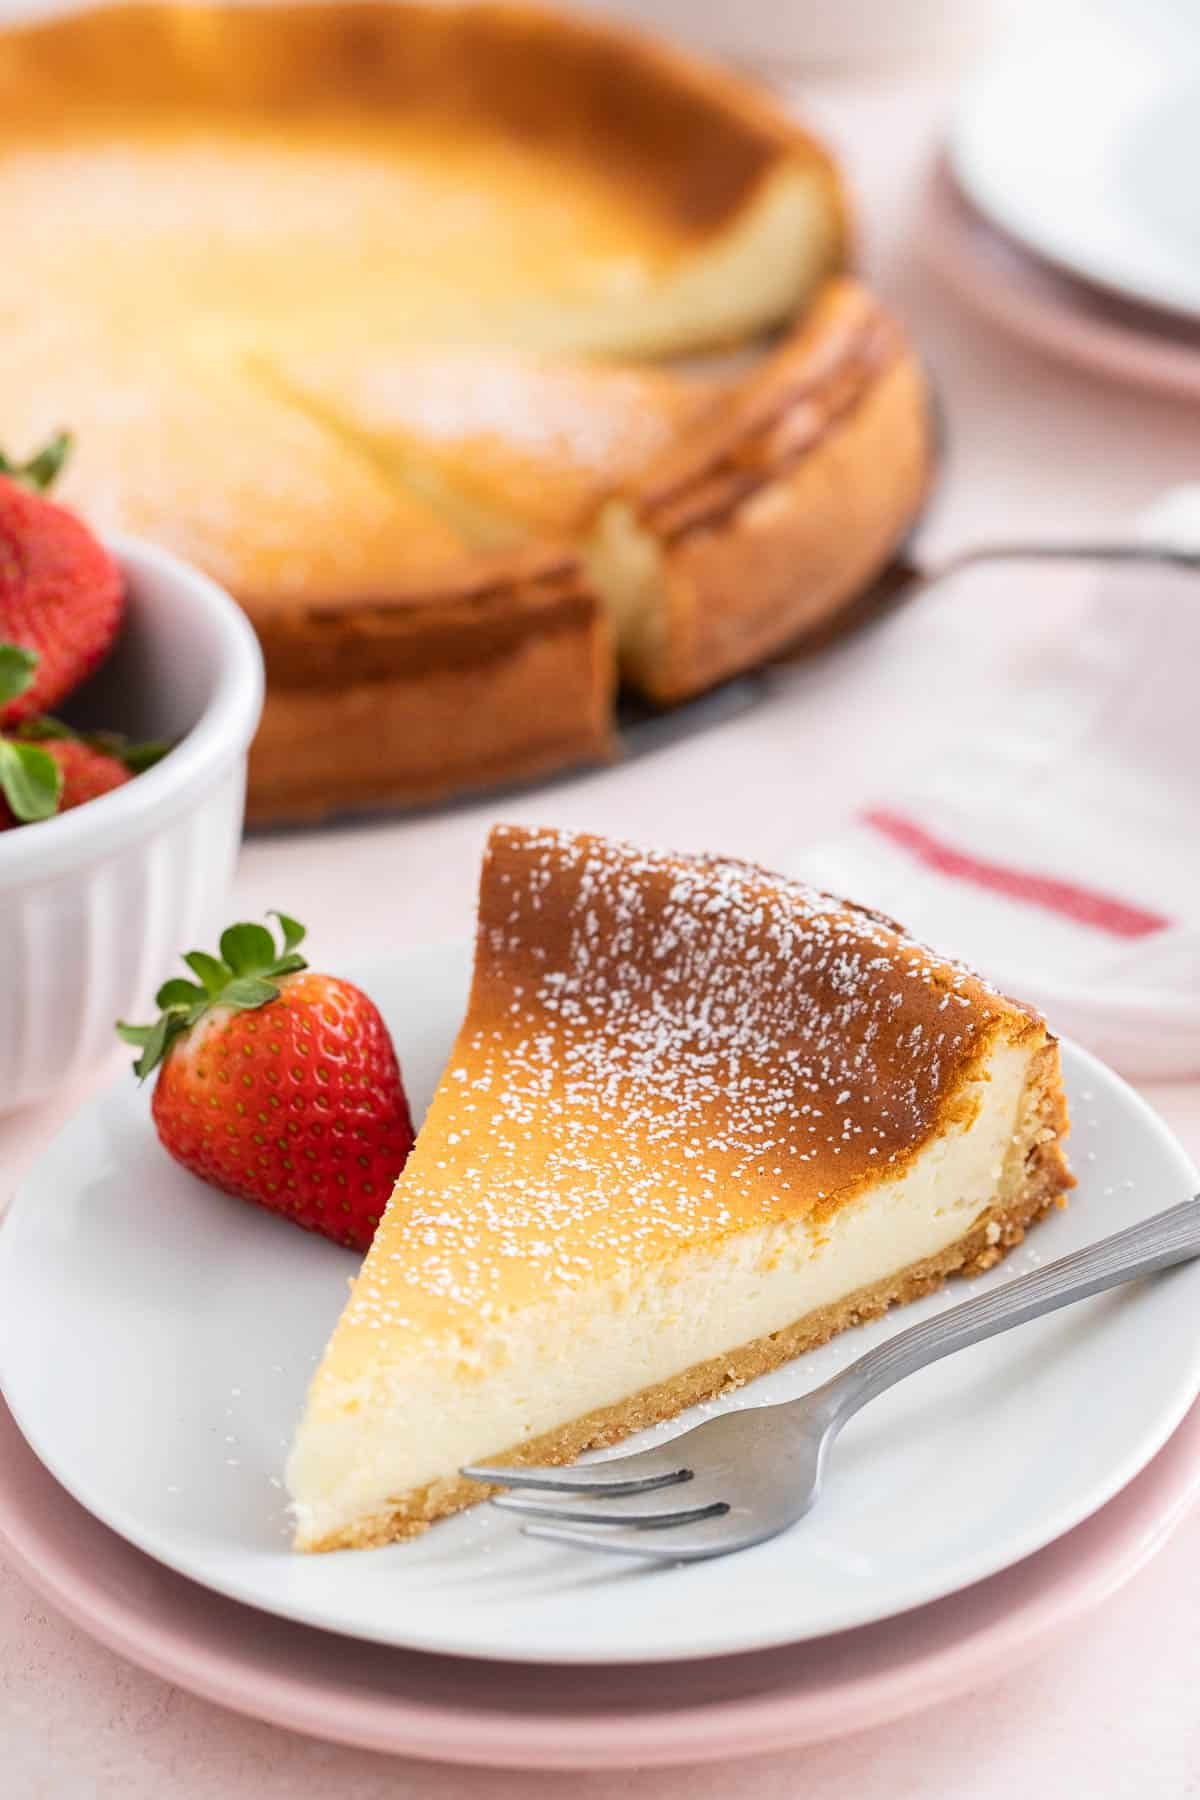 A slice of cheesecake on a white plate with a fork next to it.